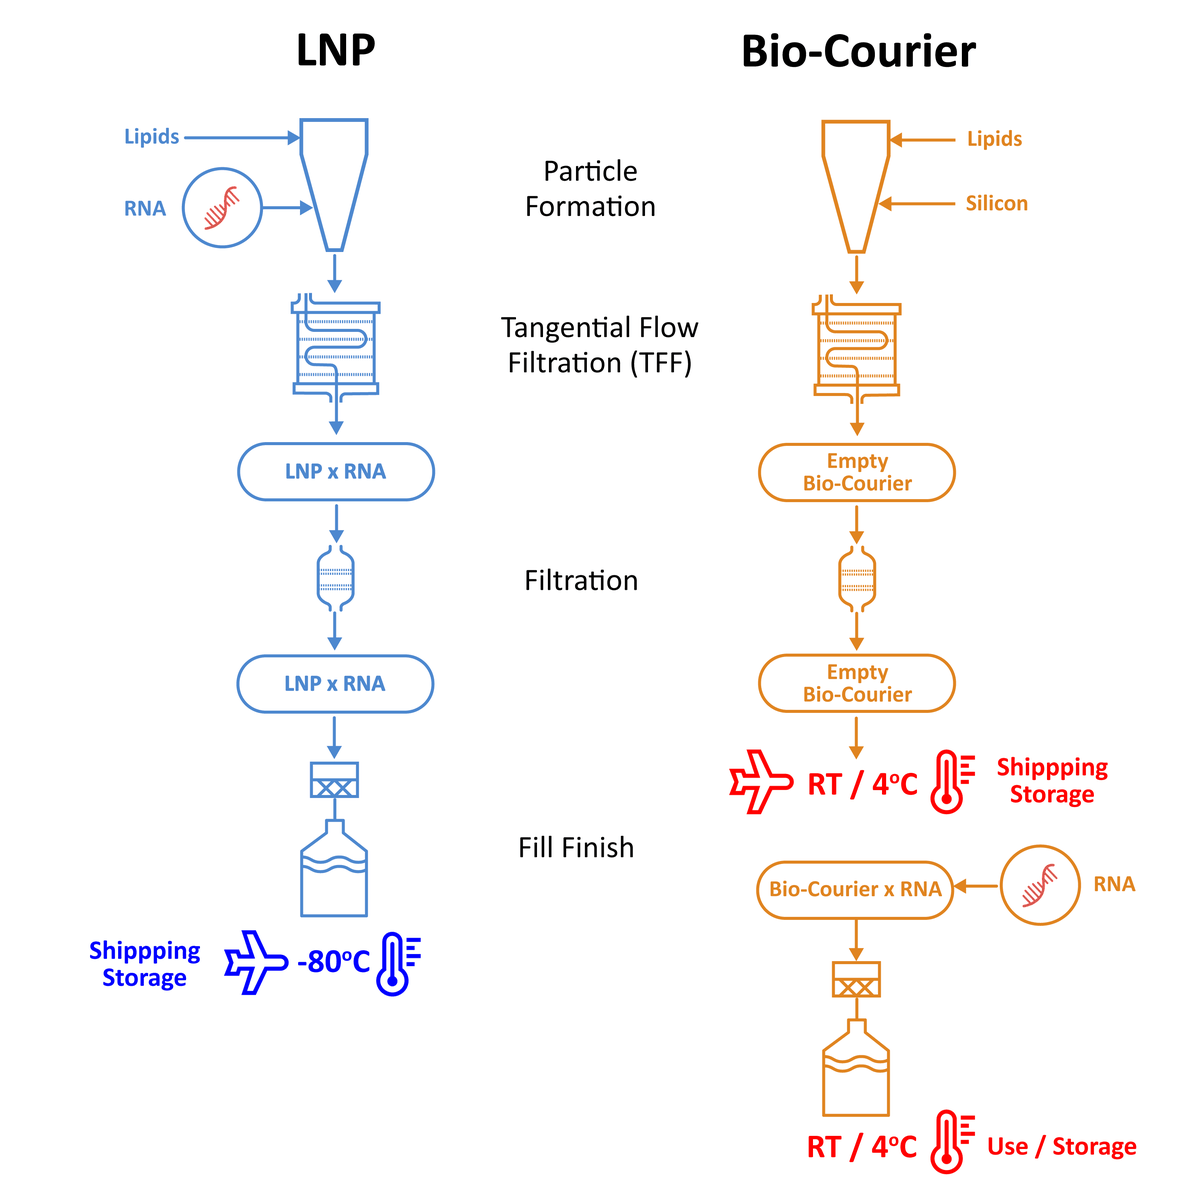 Diagram comparing manufacturing workflows for LNPs and Bio-Courier